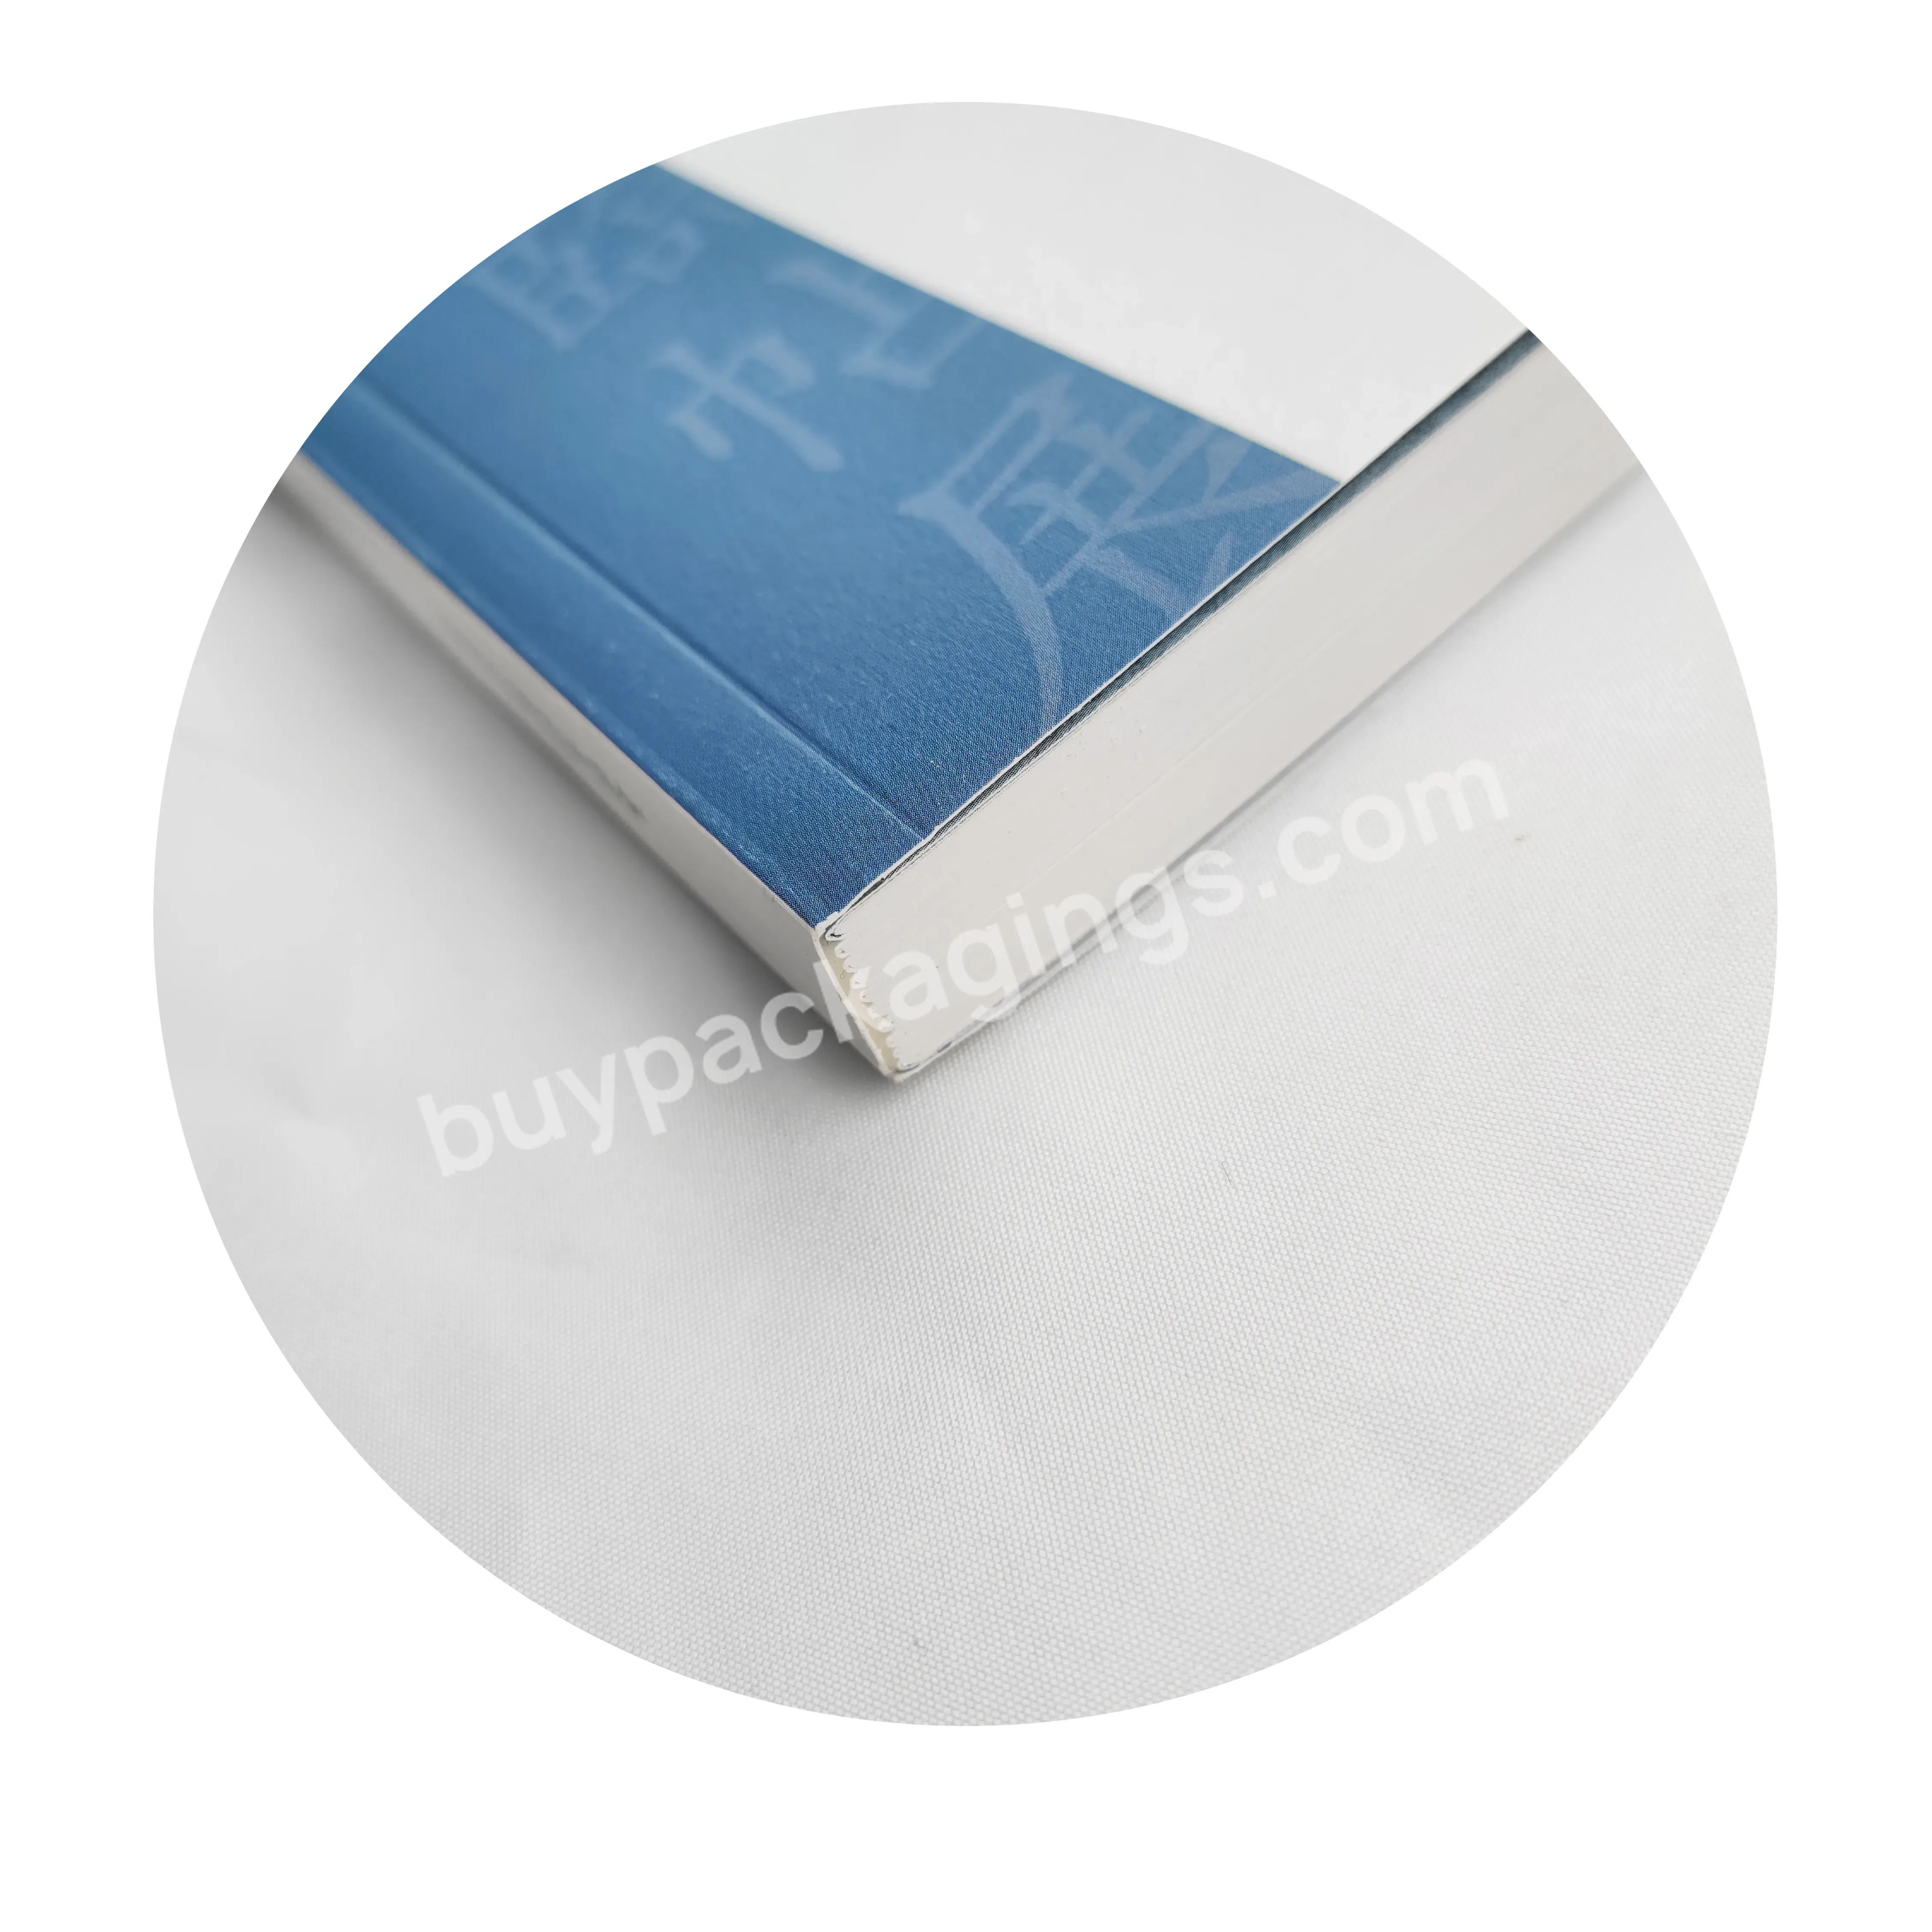 Print Your Own Books China Printing Softcover Book - Buy Printing Softcover Book,China Printing Book,Print Your Own Book.